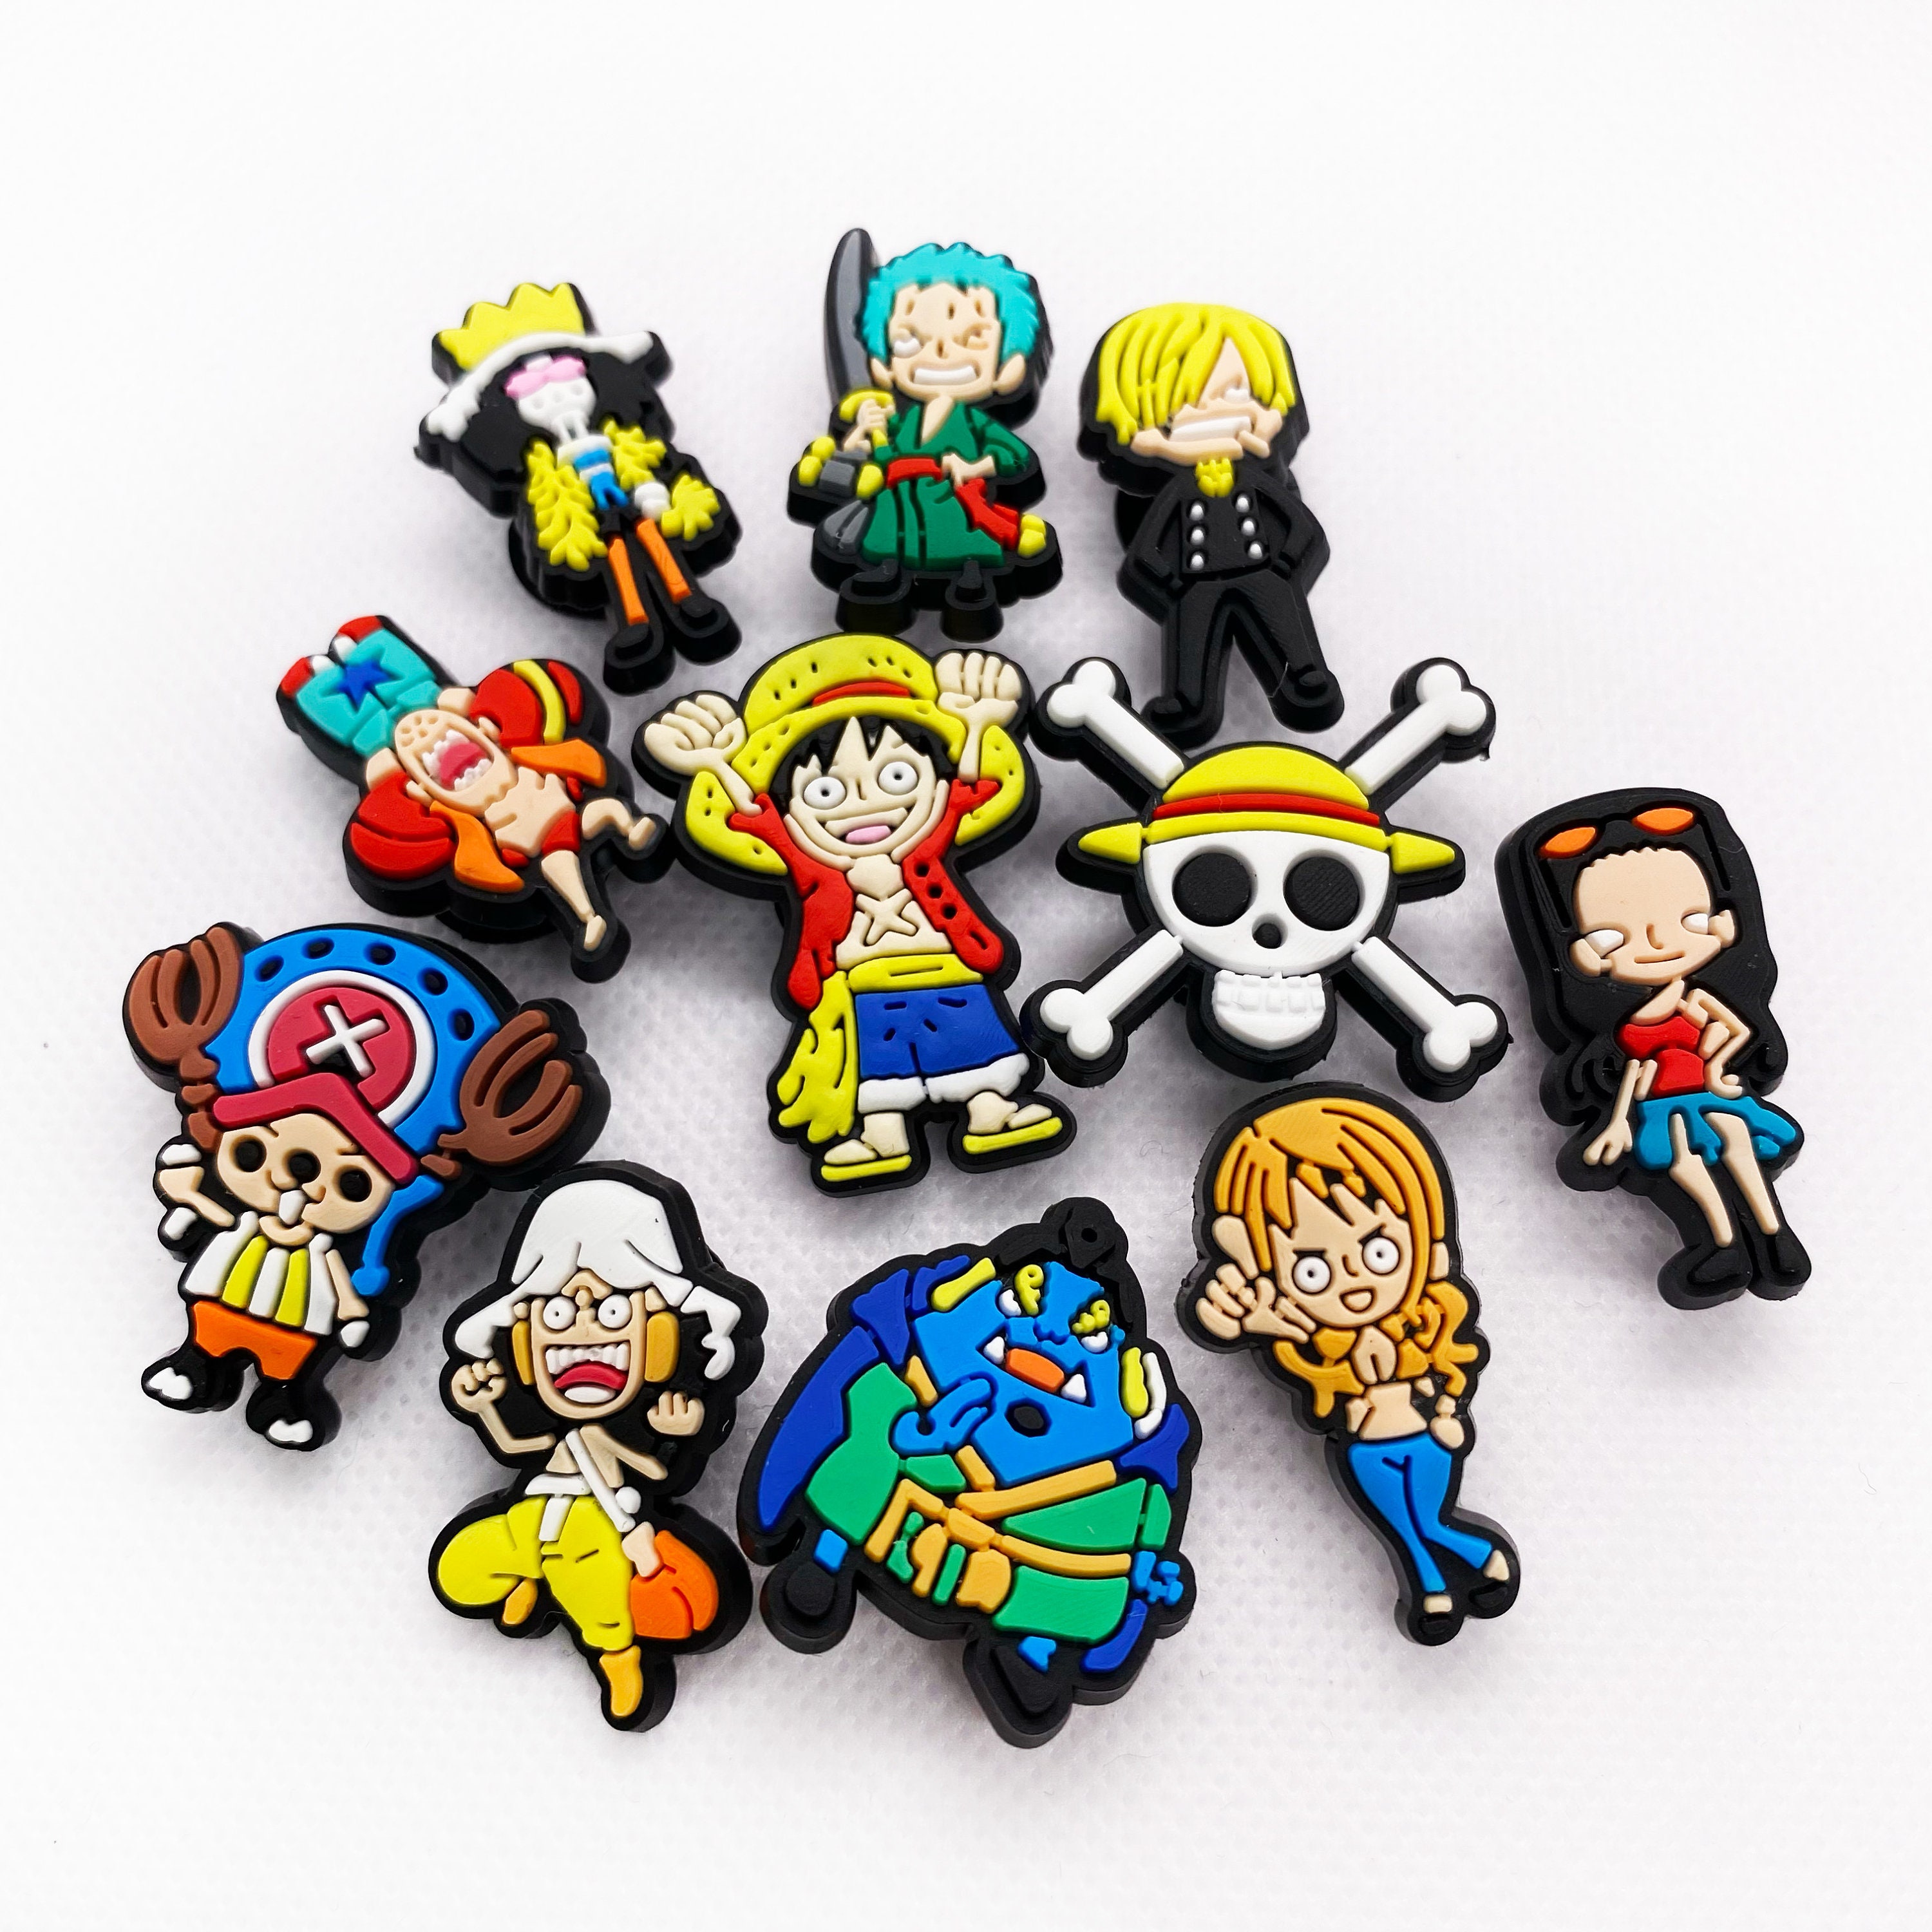 One Piece Anime Croc Charms Jibbitz Set for Crocs | Shoe Accessories | Trending One Piece Charms for Clogs | Fashionable Jibbitz